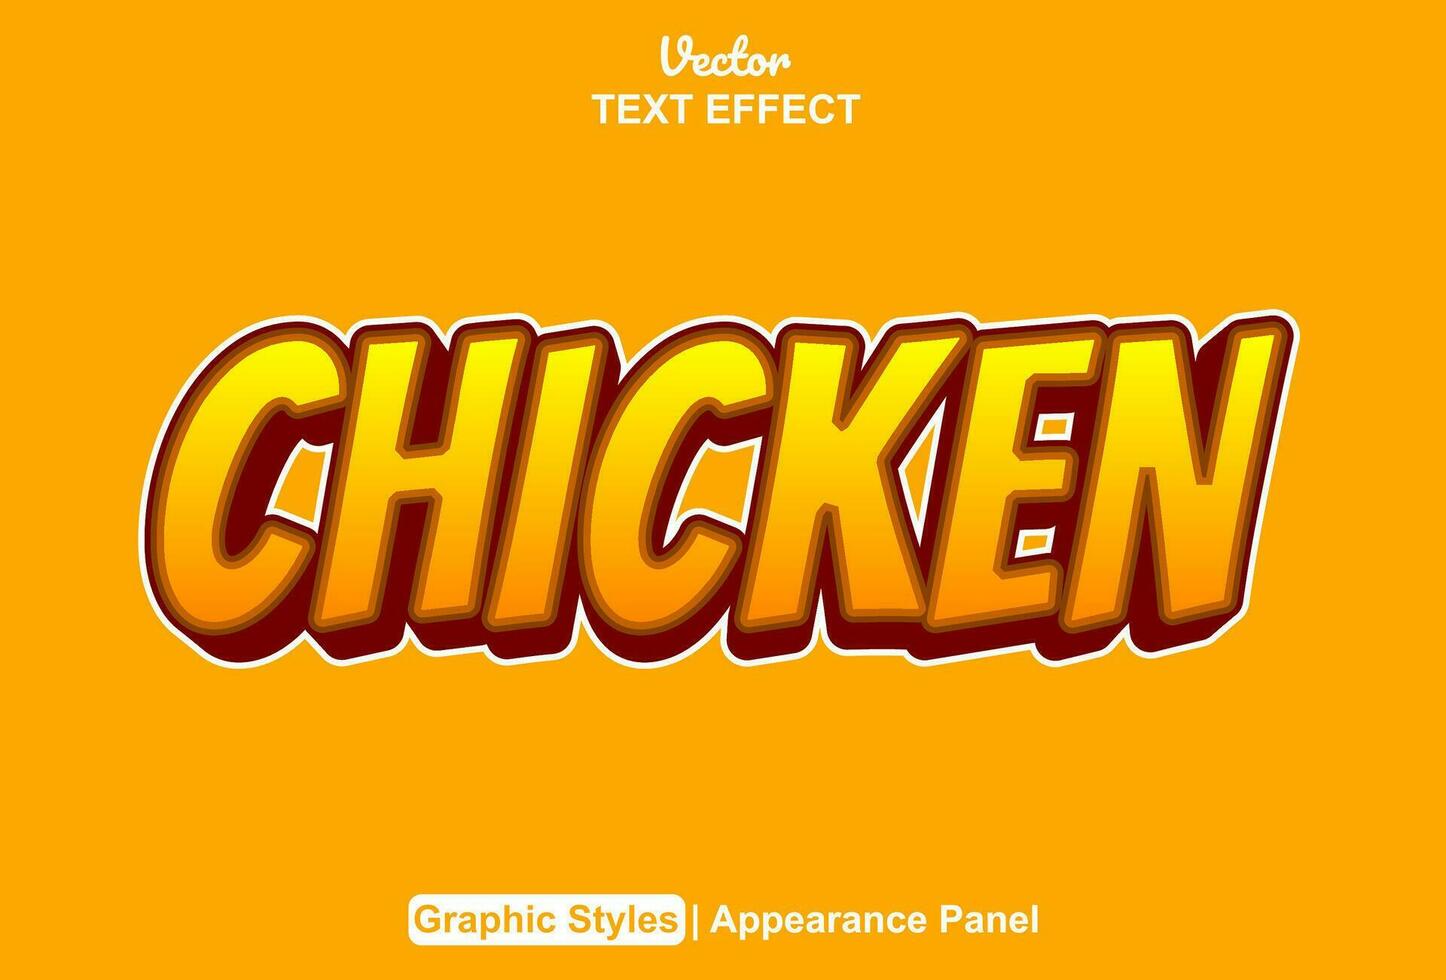 chicken text effect with orange color graphic style editable. vector